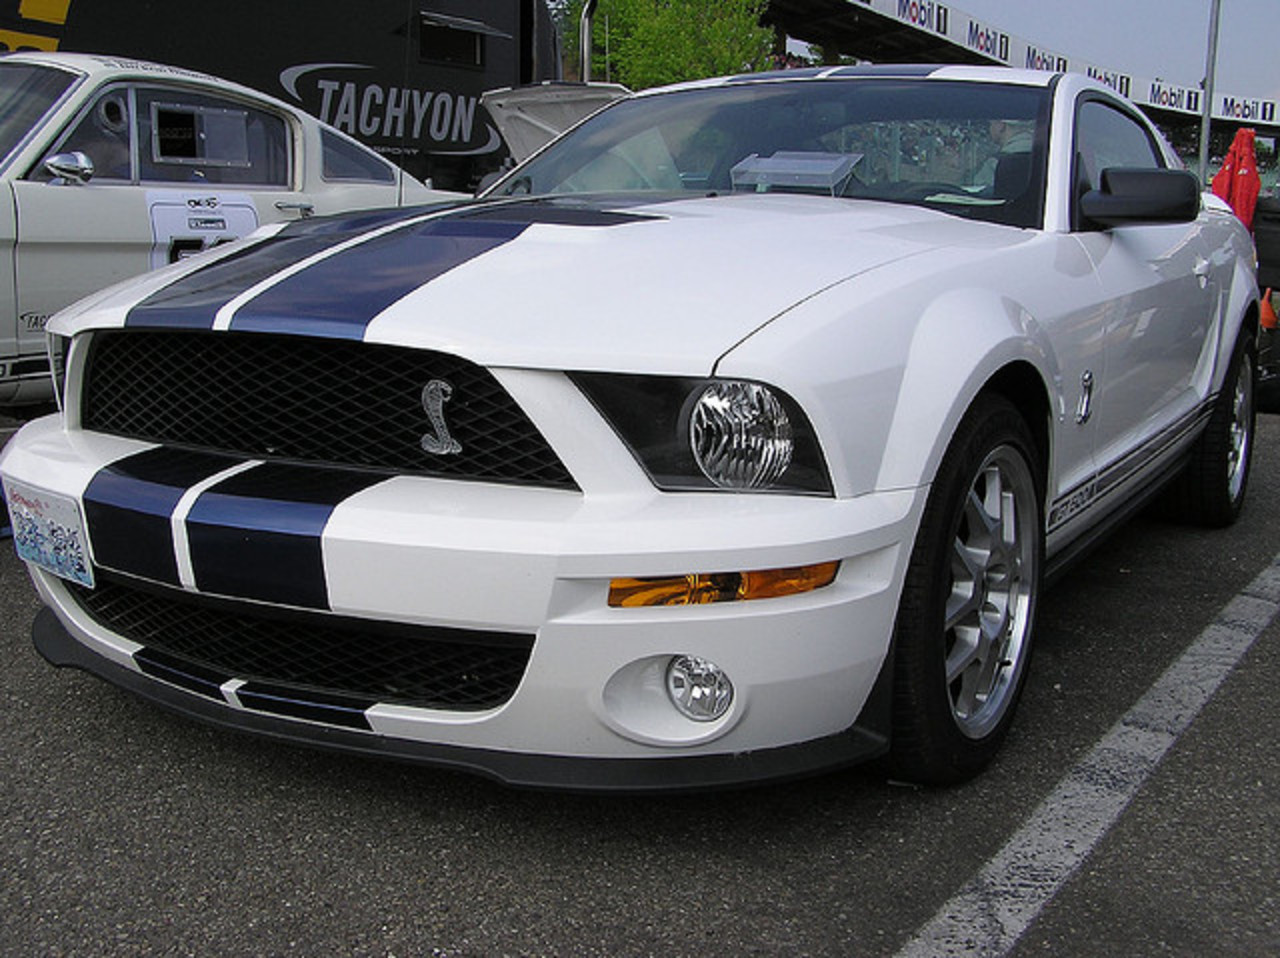 Ford Mustang Shelby GT 500 / Flickr - Partage de photos!